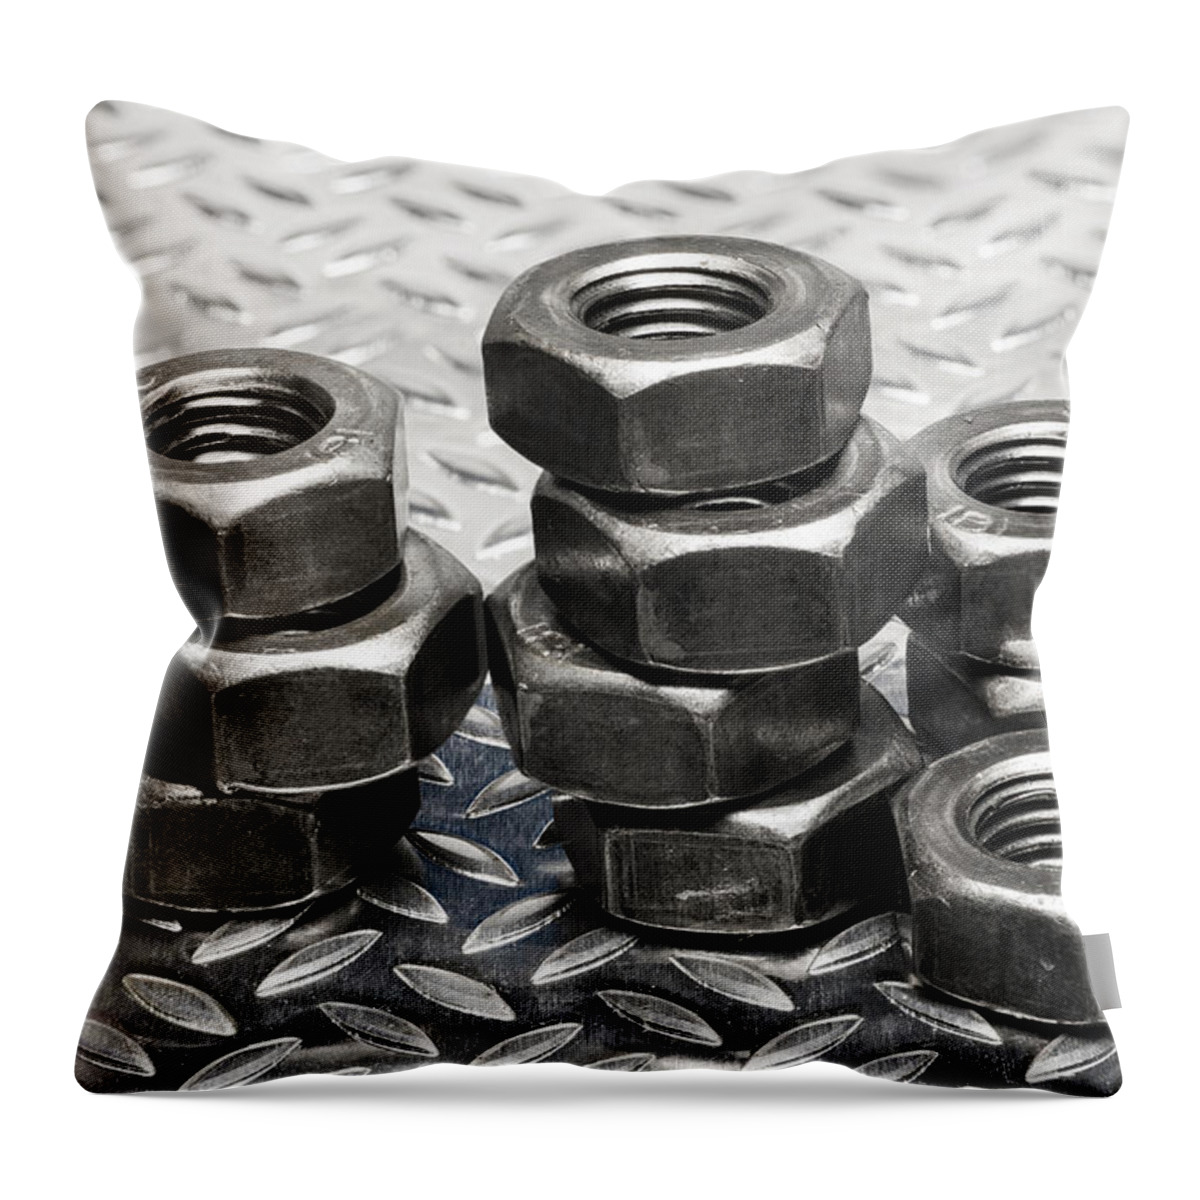 Hardware Throw Pillow featuring the photograph Stacks of Metric thread nuts by John Paul Cullen